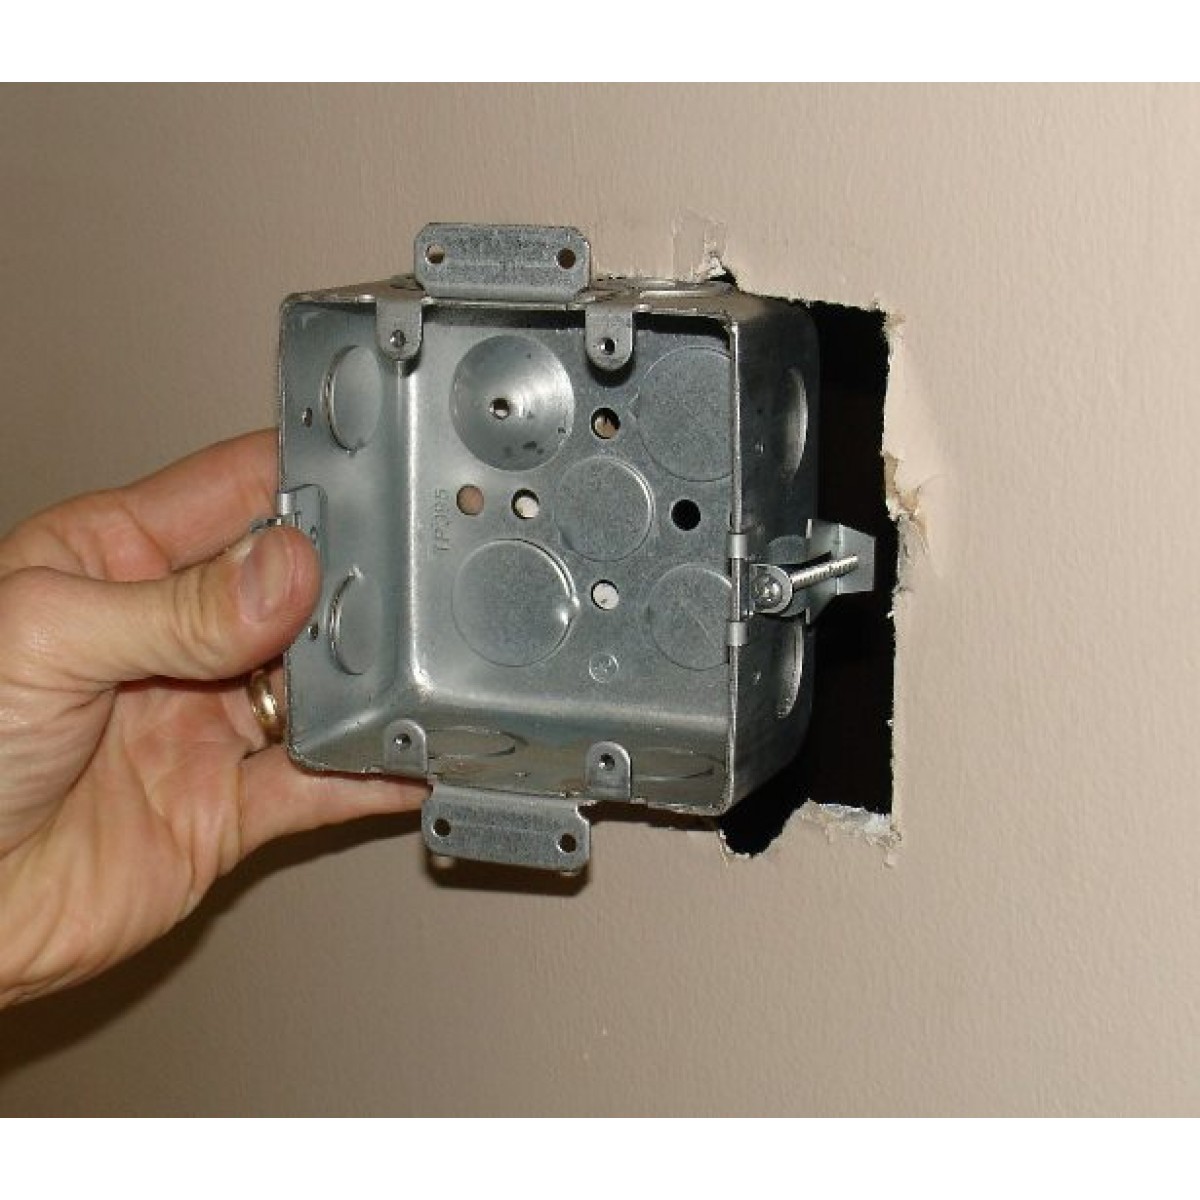 1 Pc, 2-1/8 In. Deep, Two Gang Multi Device Switch Box w/Plaster Ears & Old Work Clips, (4) 1/2 In. & (4) 1/2-3/4 In. Side Knockouts; (2) 1/2 In. & (2) 3/4 In Bottom, Zinc Plated Steel - image 1 of 1